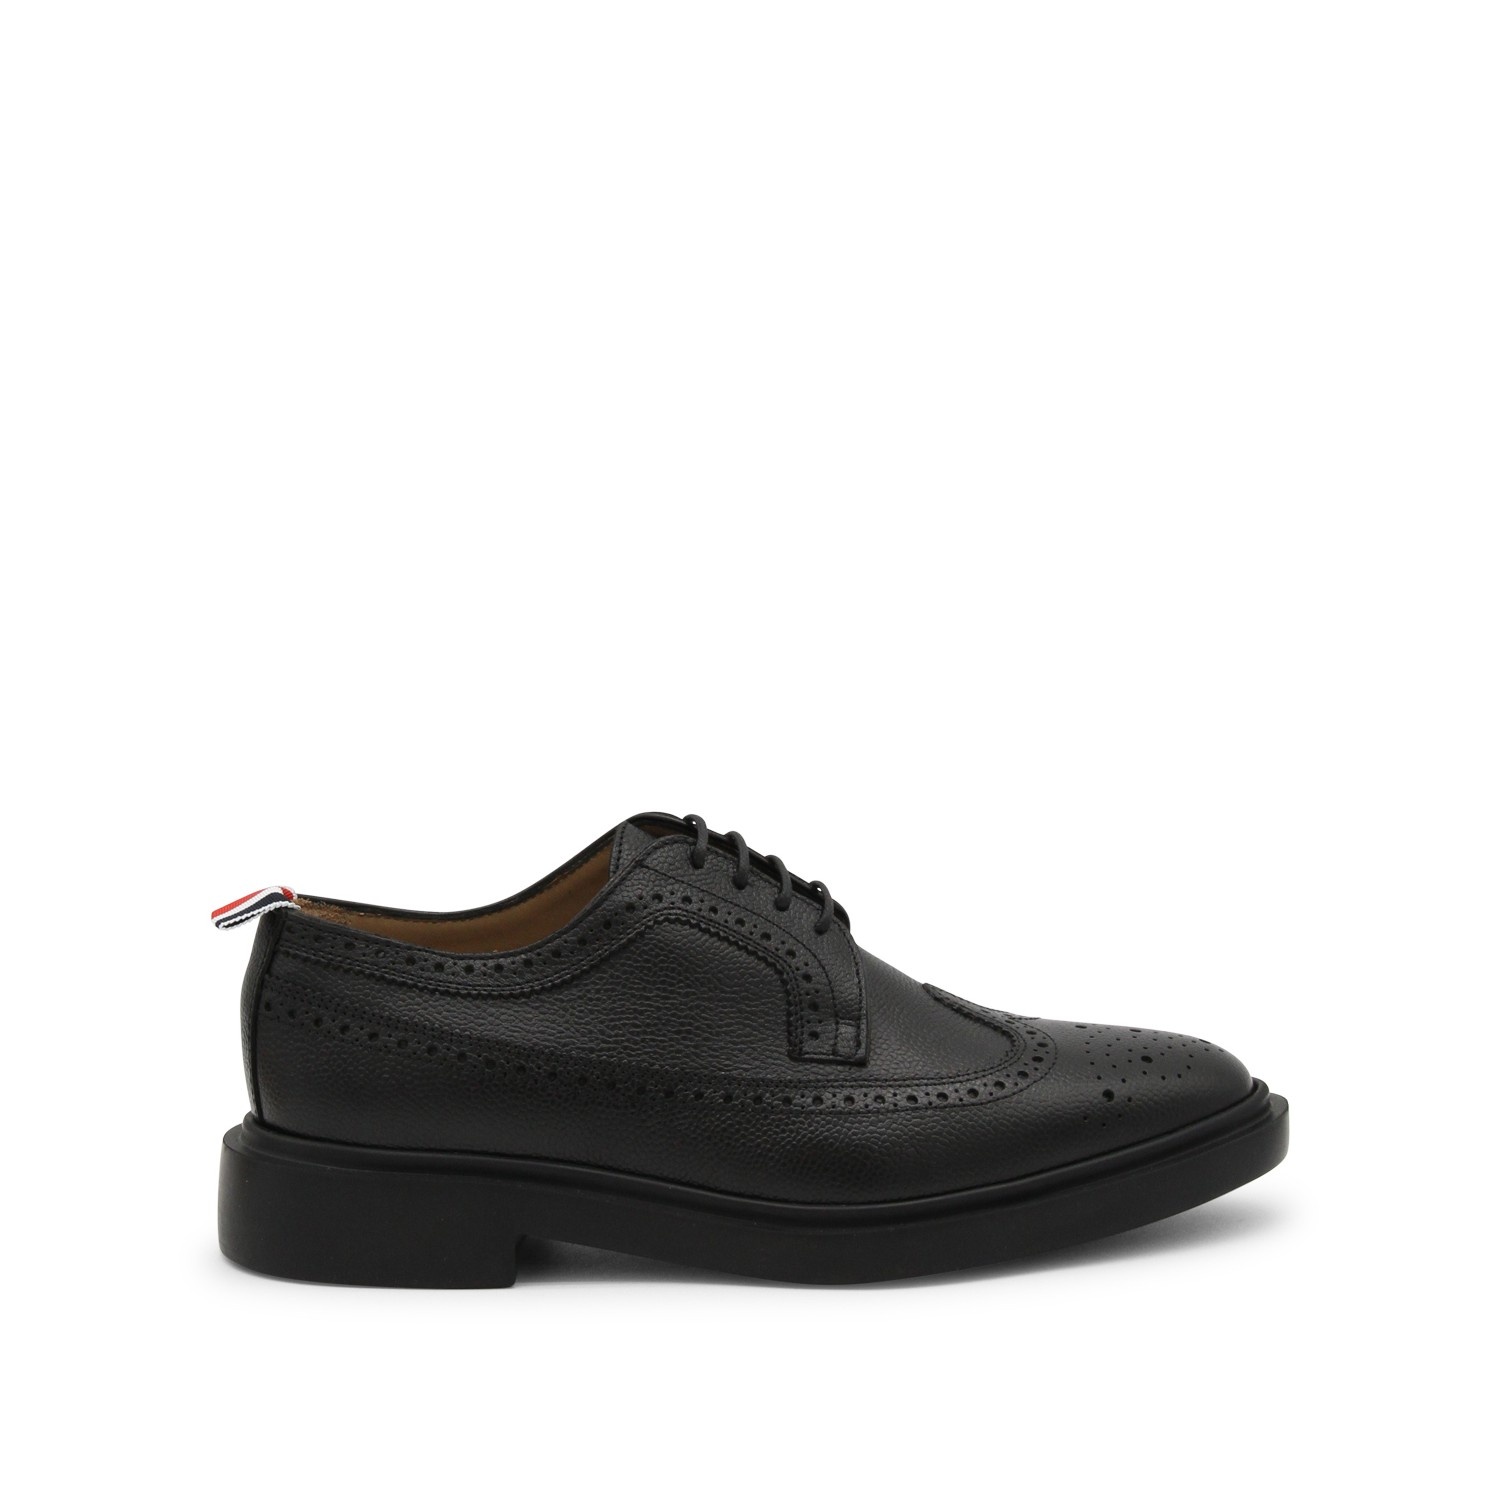 BLACK LEATHER LONGWING BROGUES - 1